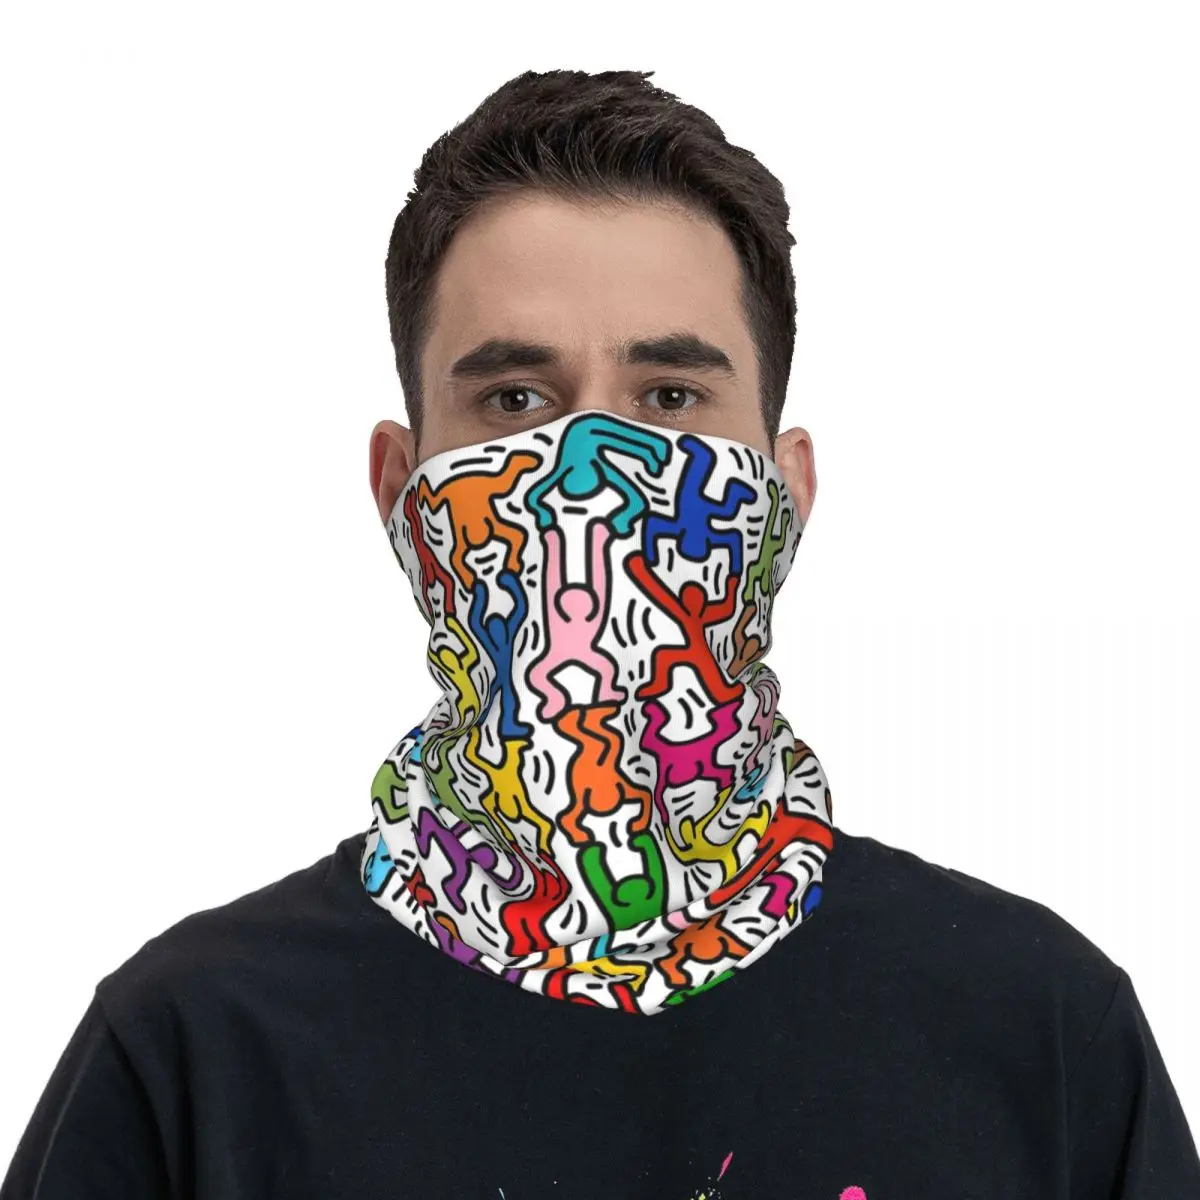 

Dancing People Keith Haring Bandana Neck Gaiter Printed Wrap Scarf Multi-use Face Mask Outdoor Sports